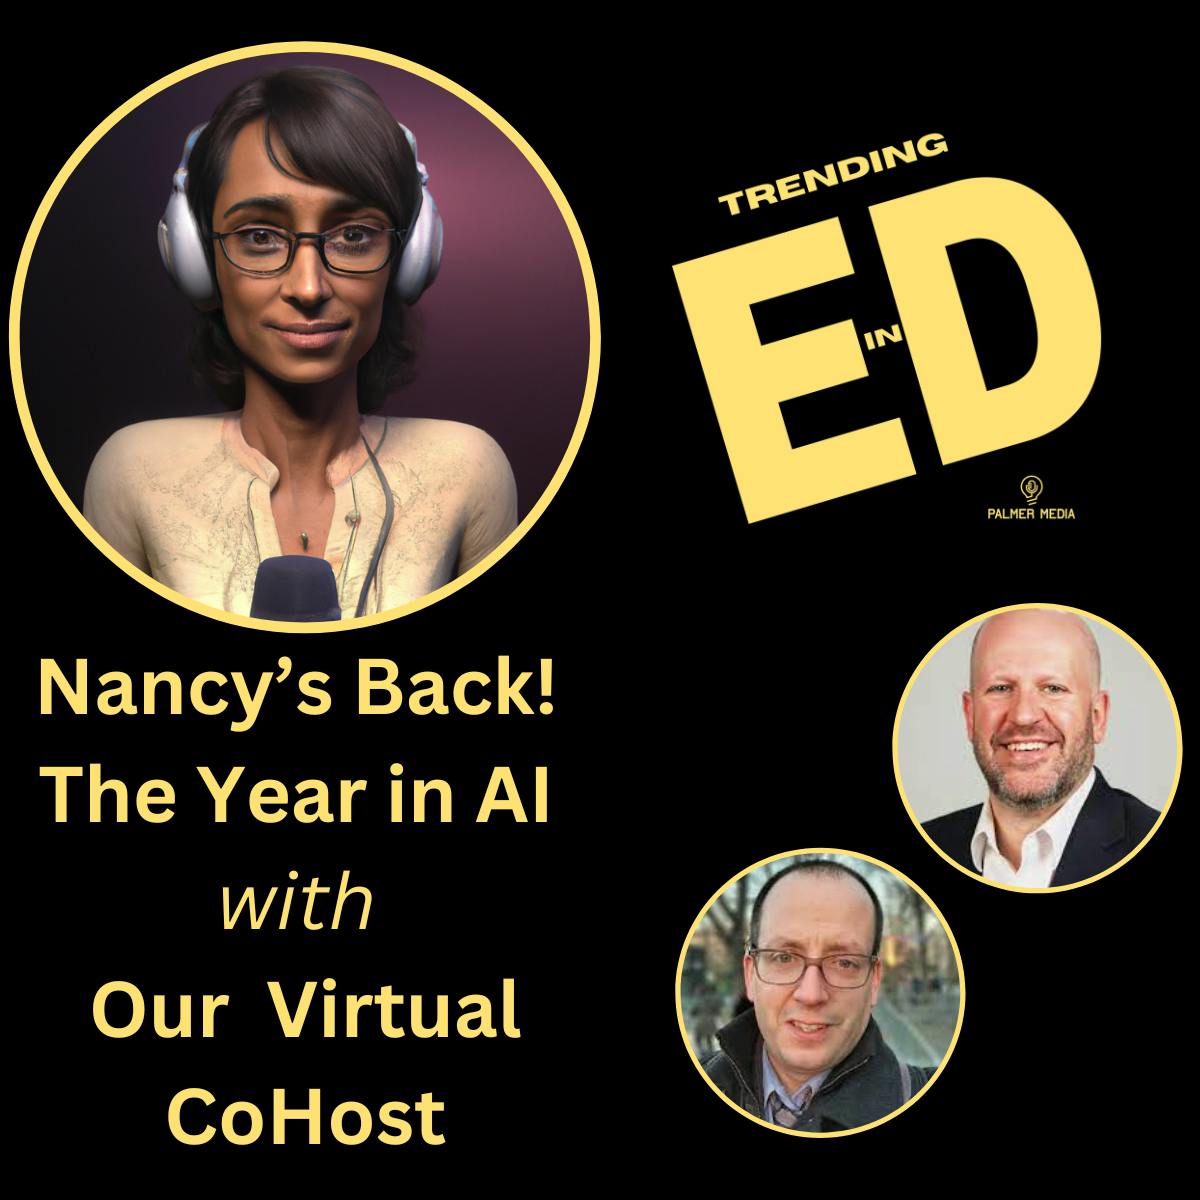 Nancy's Back! The Year in AI with Our Virtual CoHost